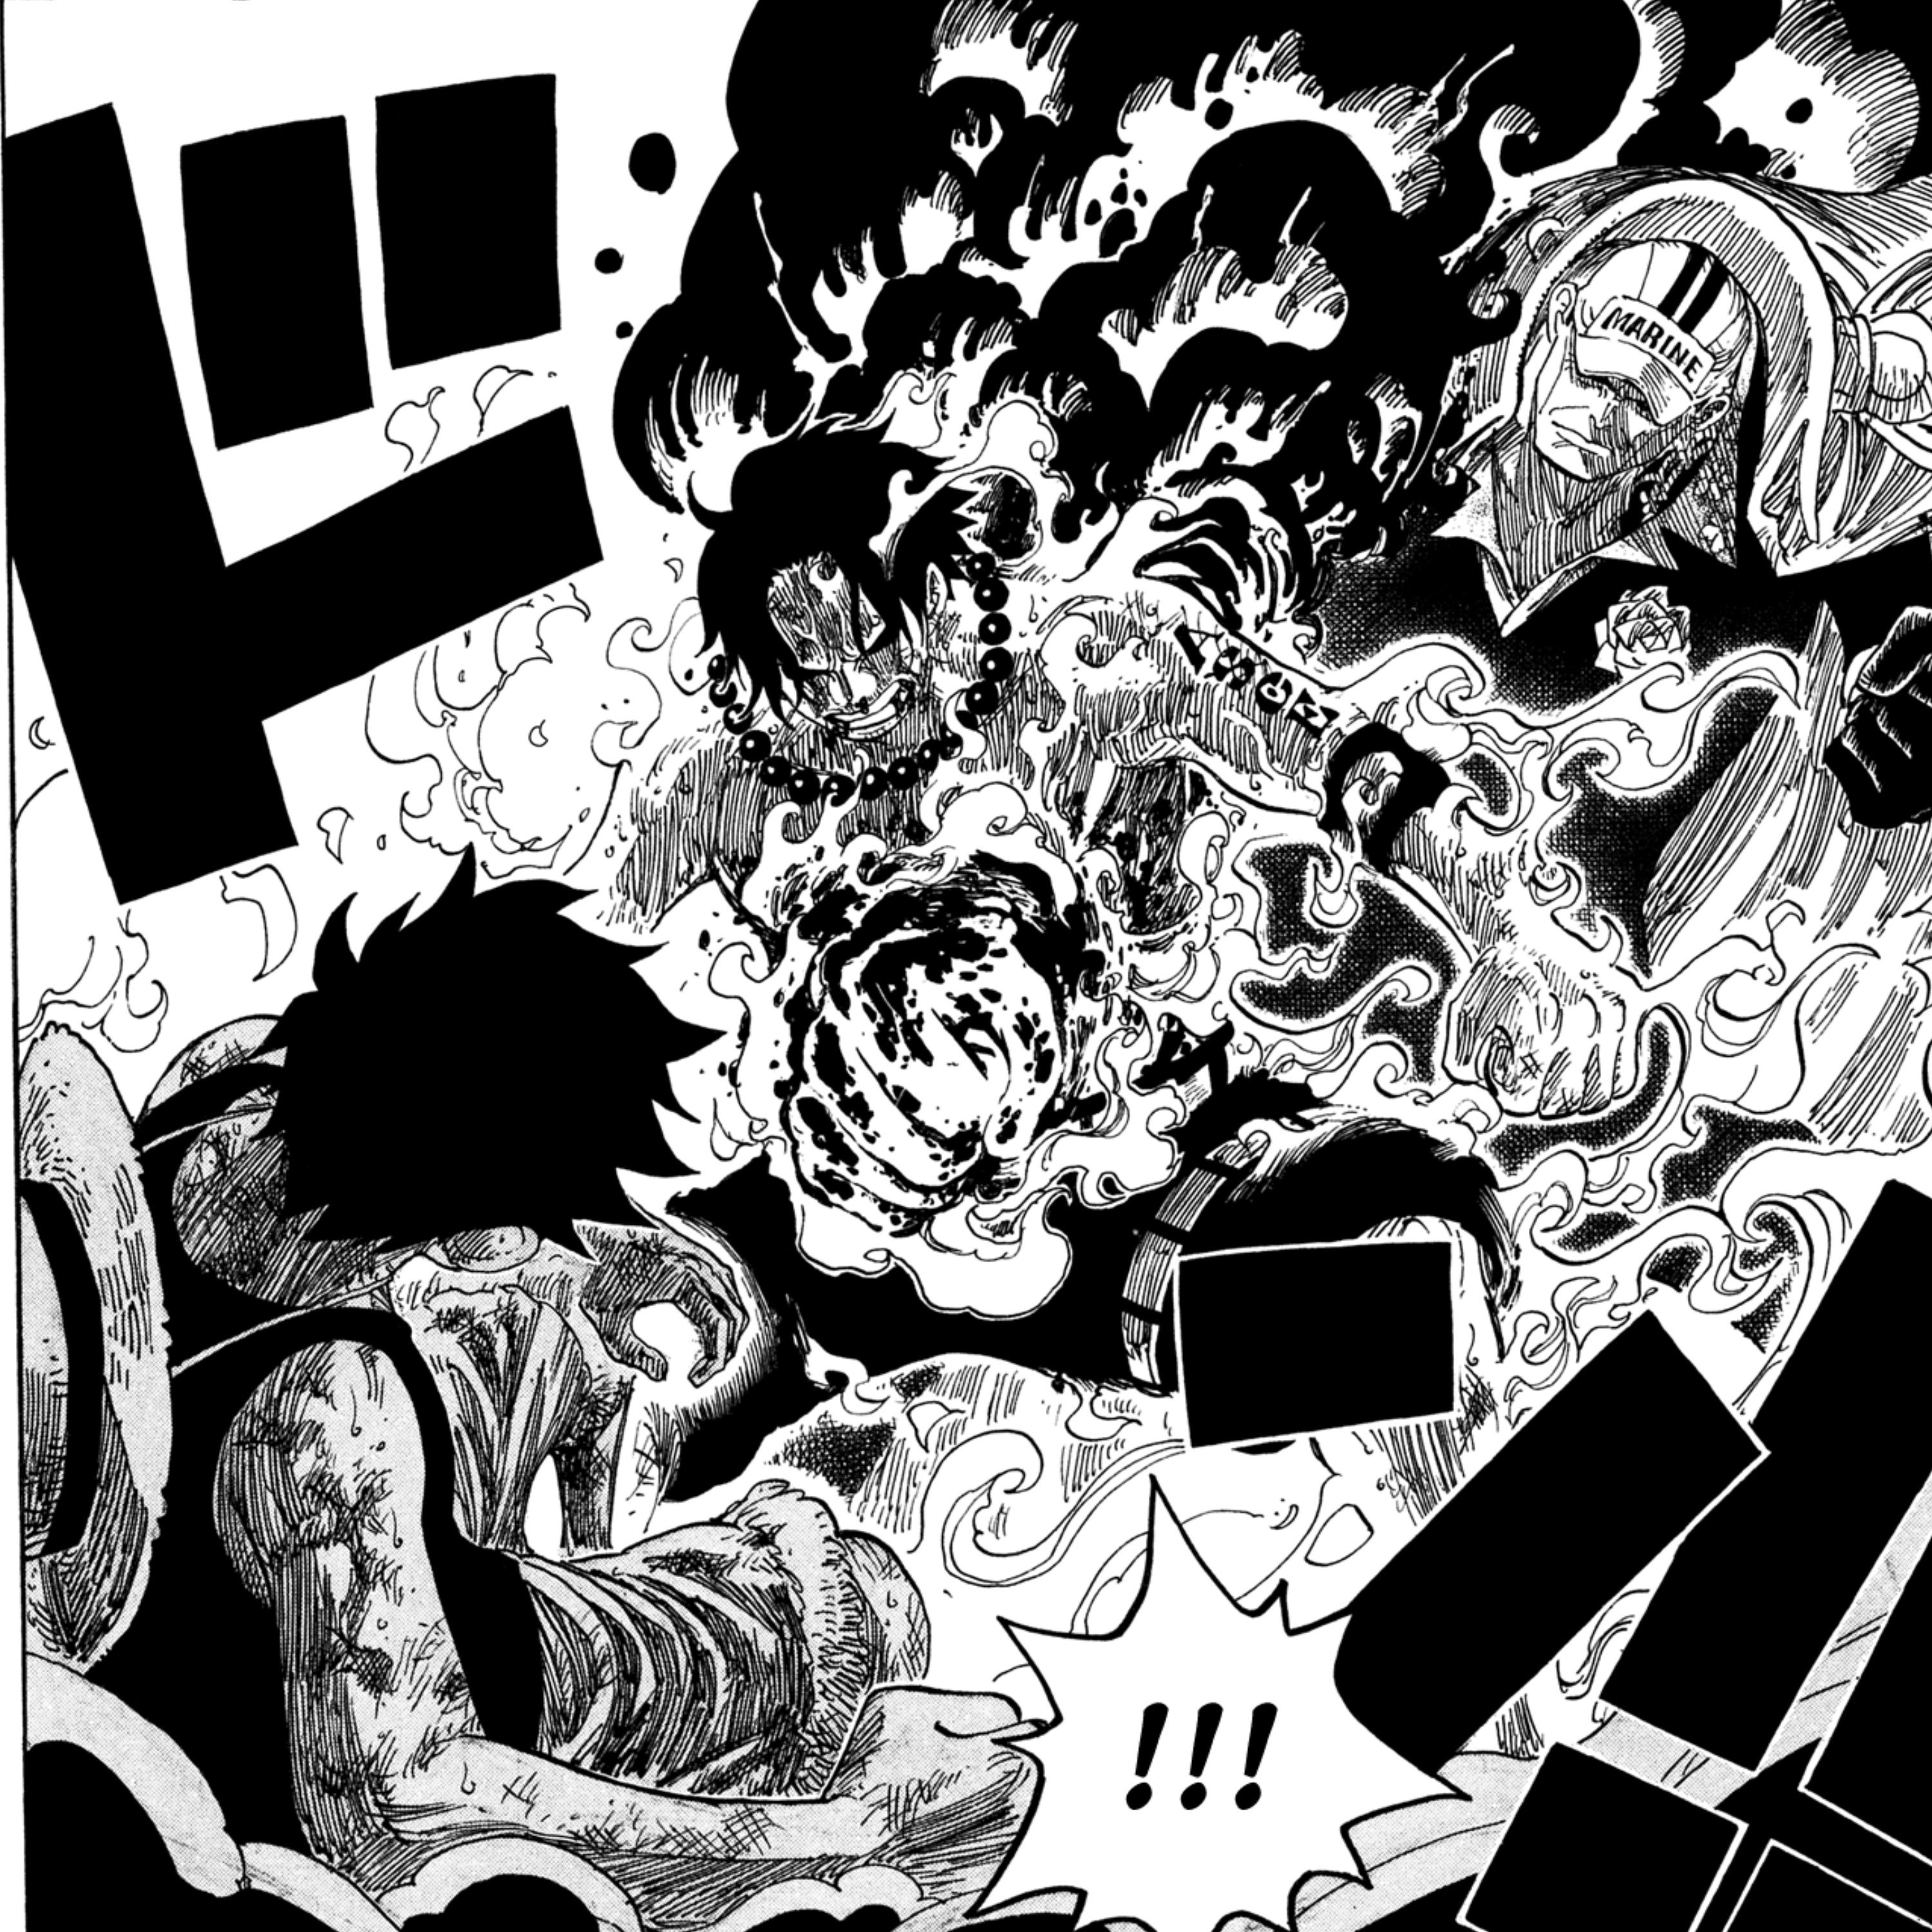 Monkey D. Luffy watches as Admiral Akainu kills Portgas D. Ace during One Piece's Marineford Arc